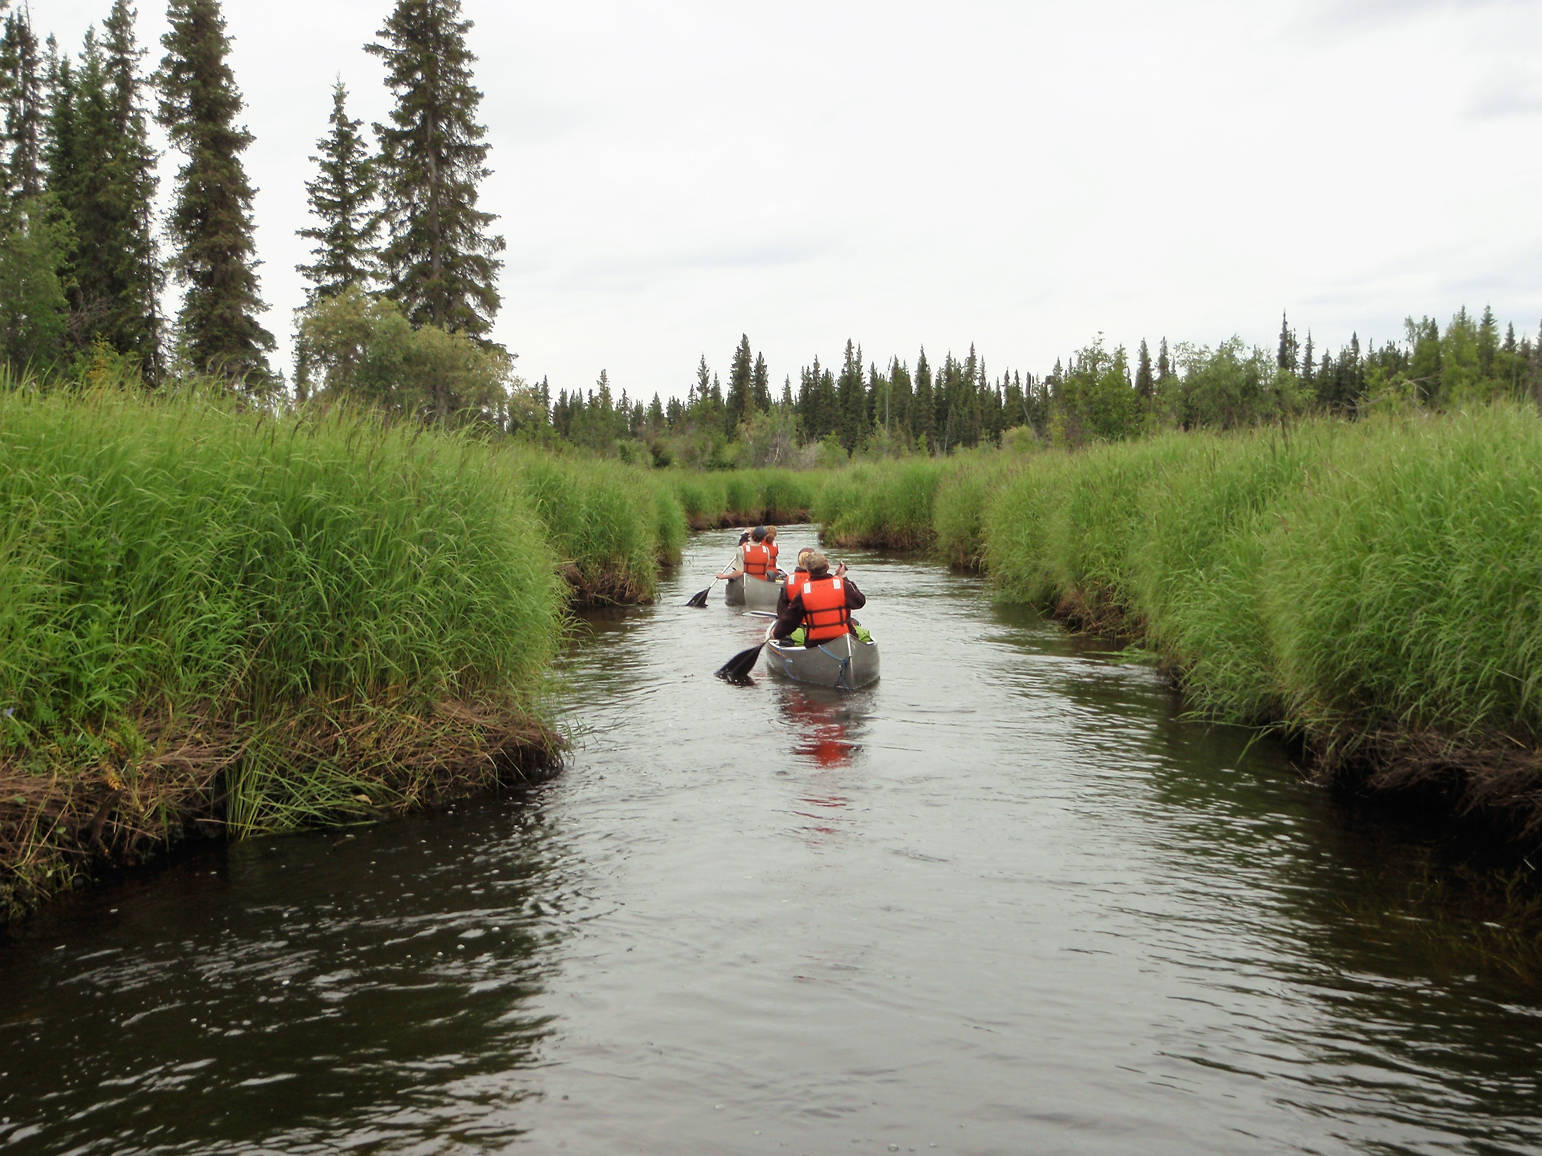 Even though the Swanson River has a slow current, canoeists smartly wear life jackets. (Photo courtesy Kenai National Wildlif Refuge)